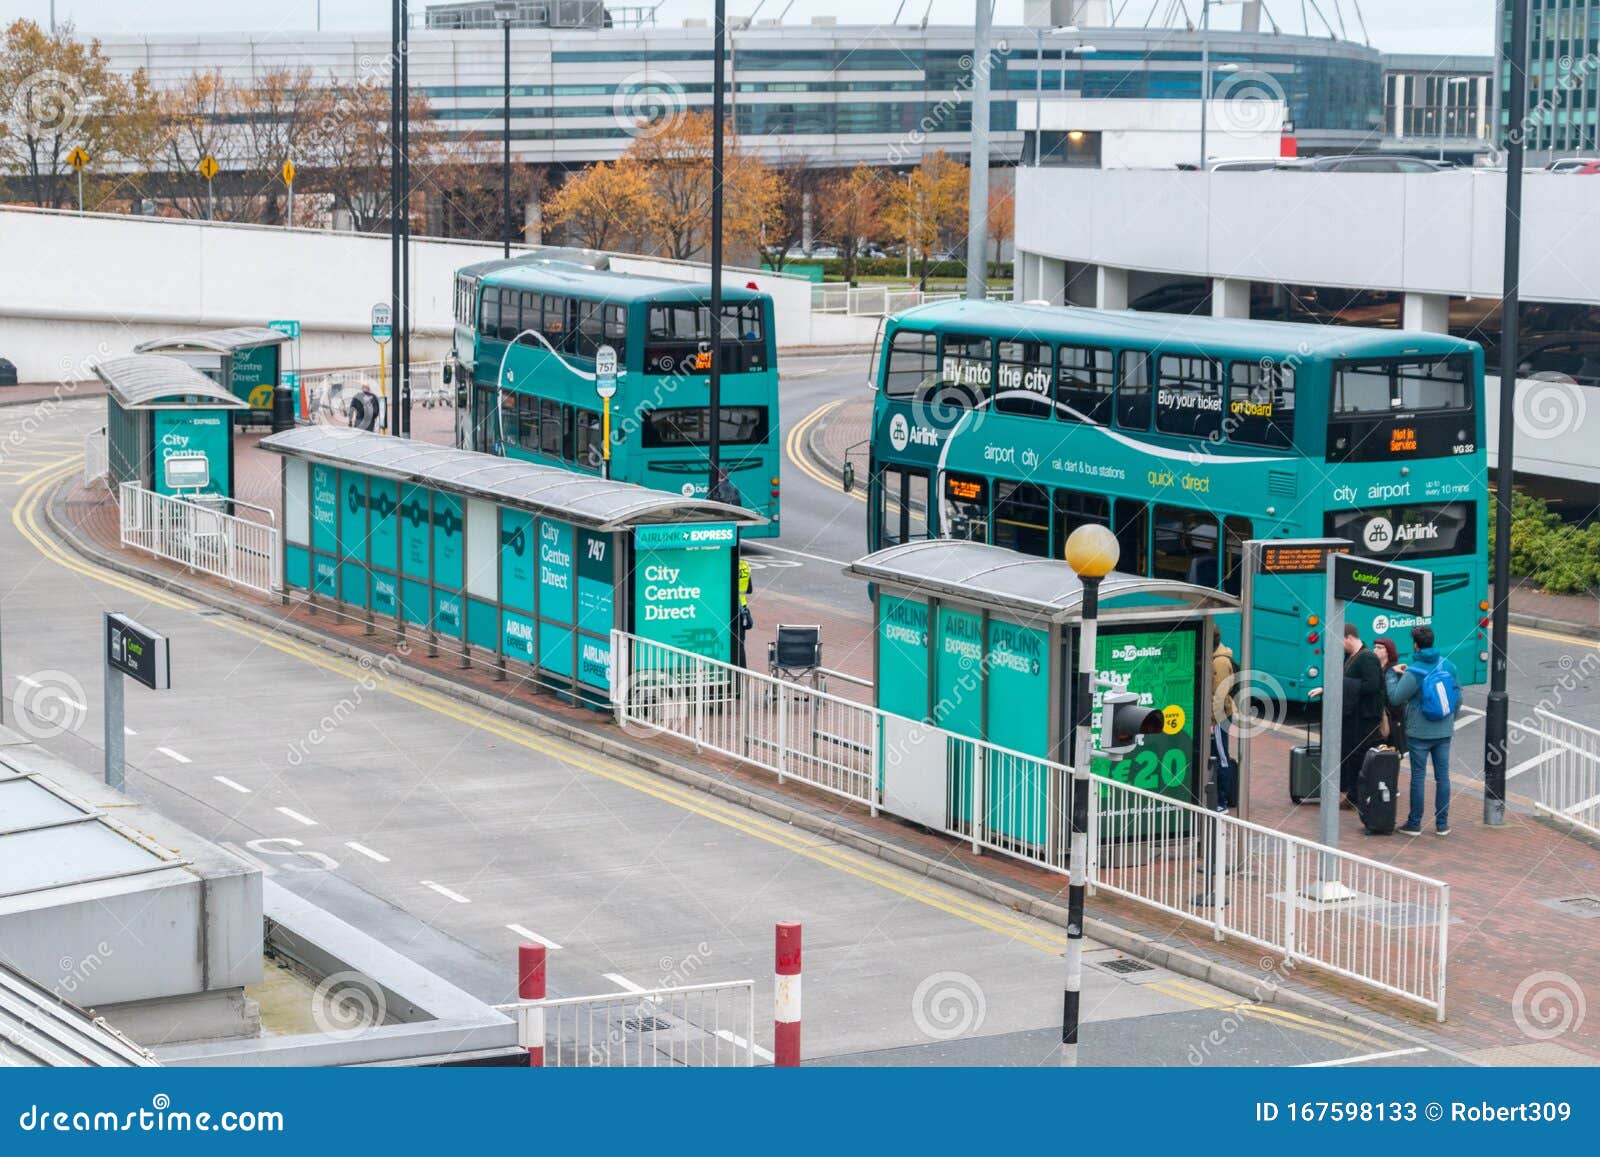 Airlink Express Bus Stop at Dublin Airport Editorial Stock Photo ...